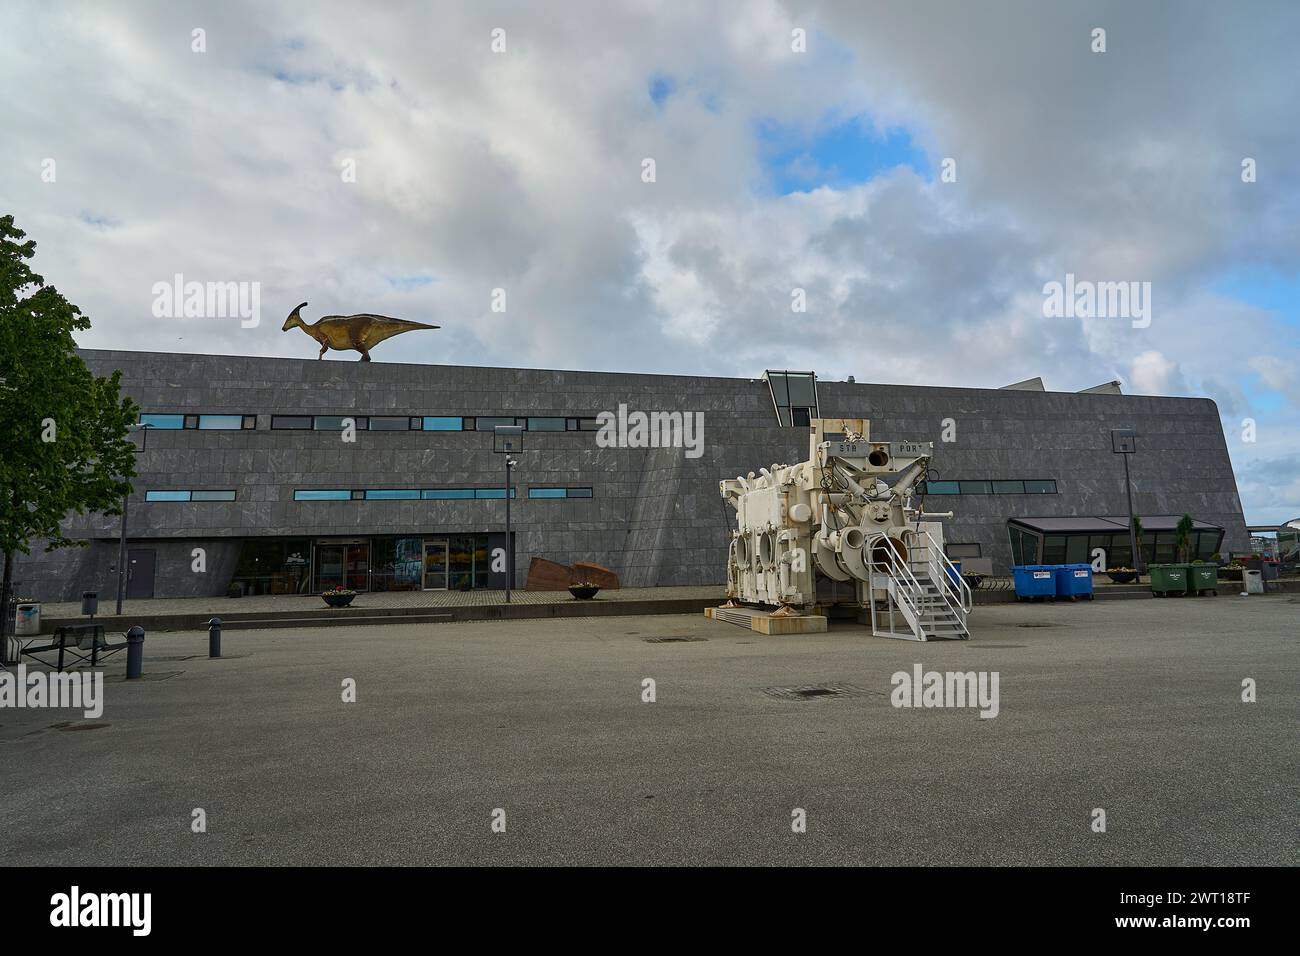 Stavanger, Norway - 05 29 2022: Norwegian Petroleum Museum with oil drilling equipment in the front and a dinosaur on the roof. Stock Photo